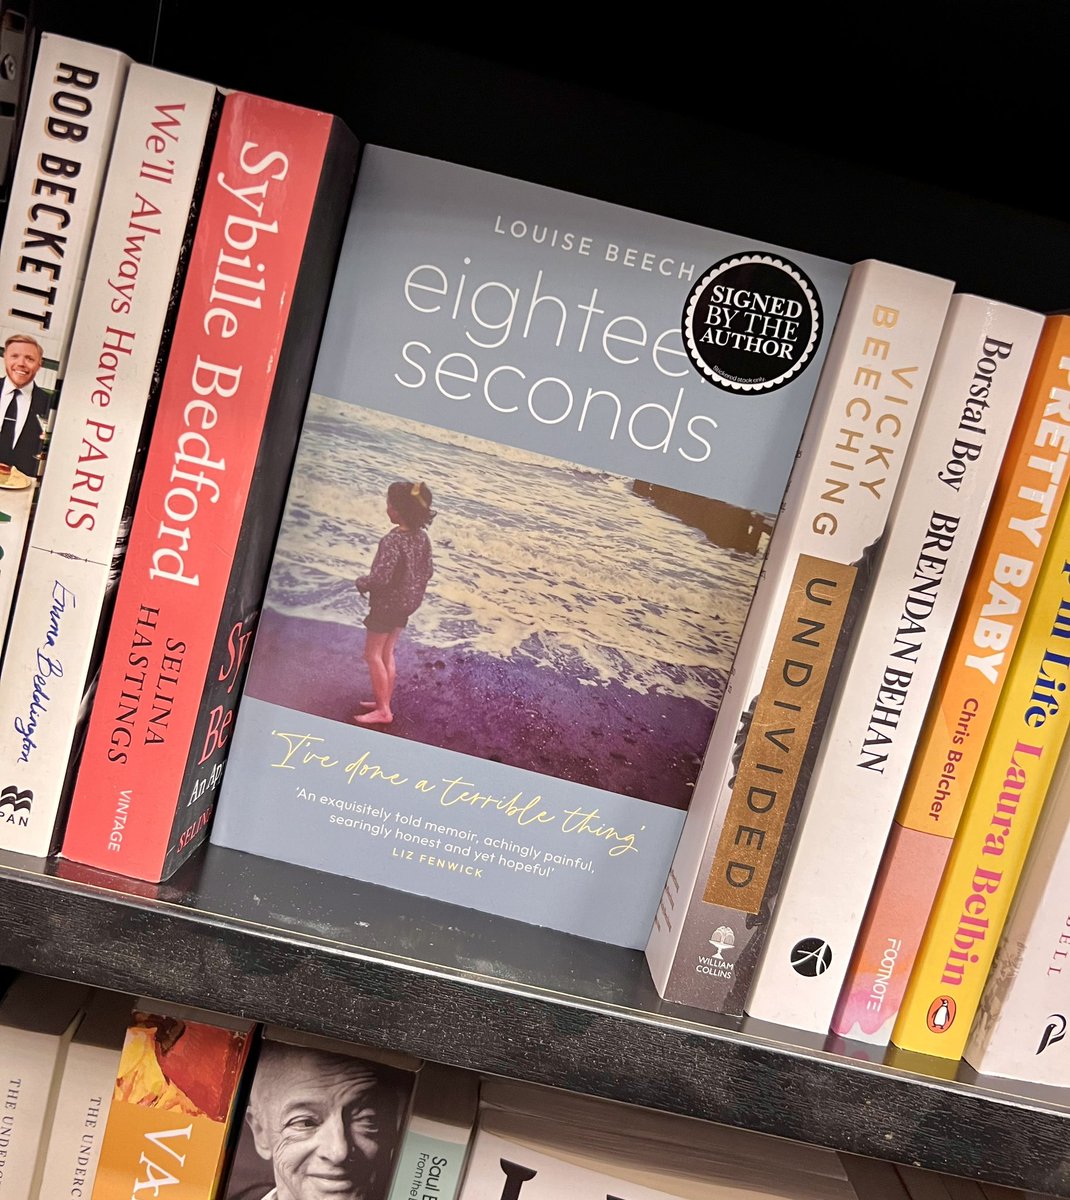 There are now signed copies of the memoir #EighteenSeconds in the gorgeous @WaterstonesMCR store. If you’re a #Kindle reader, the book is still just 99p for another week too. #Manchester @MardleBooks #KindleDeal #signedbooks